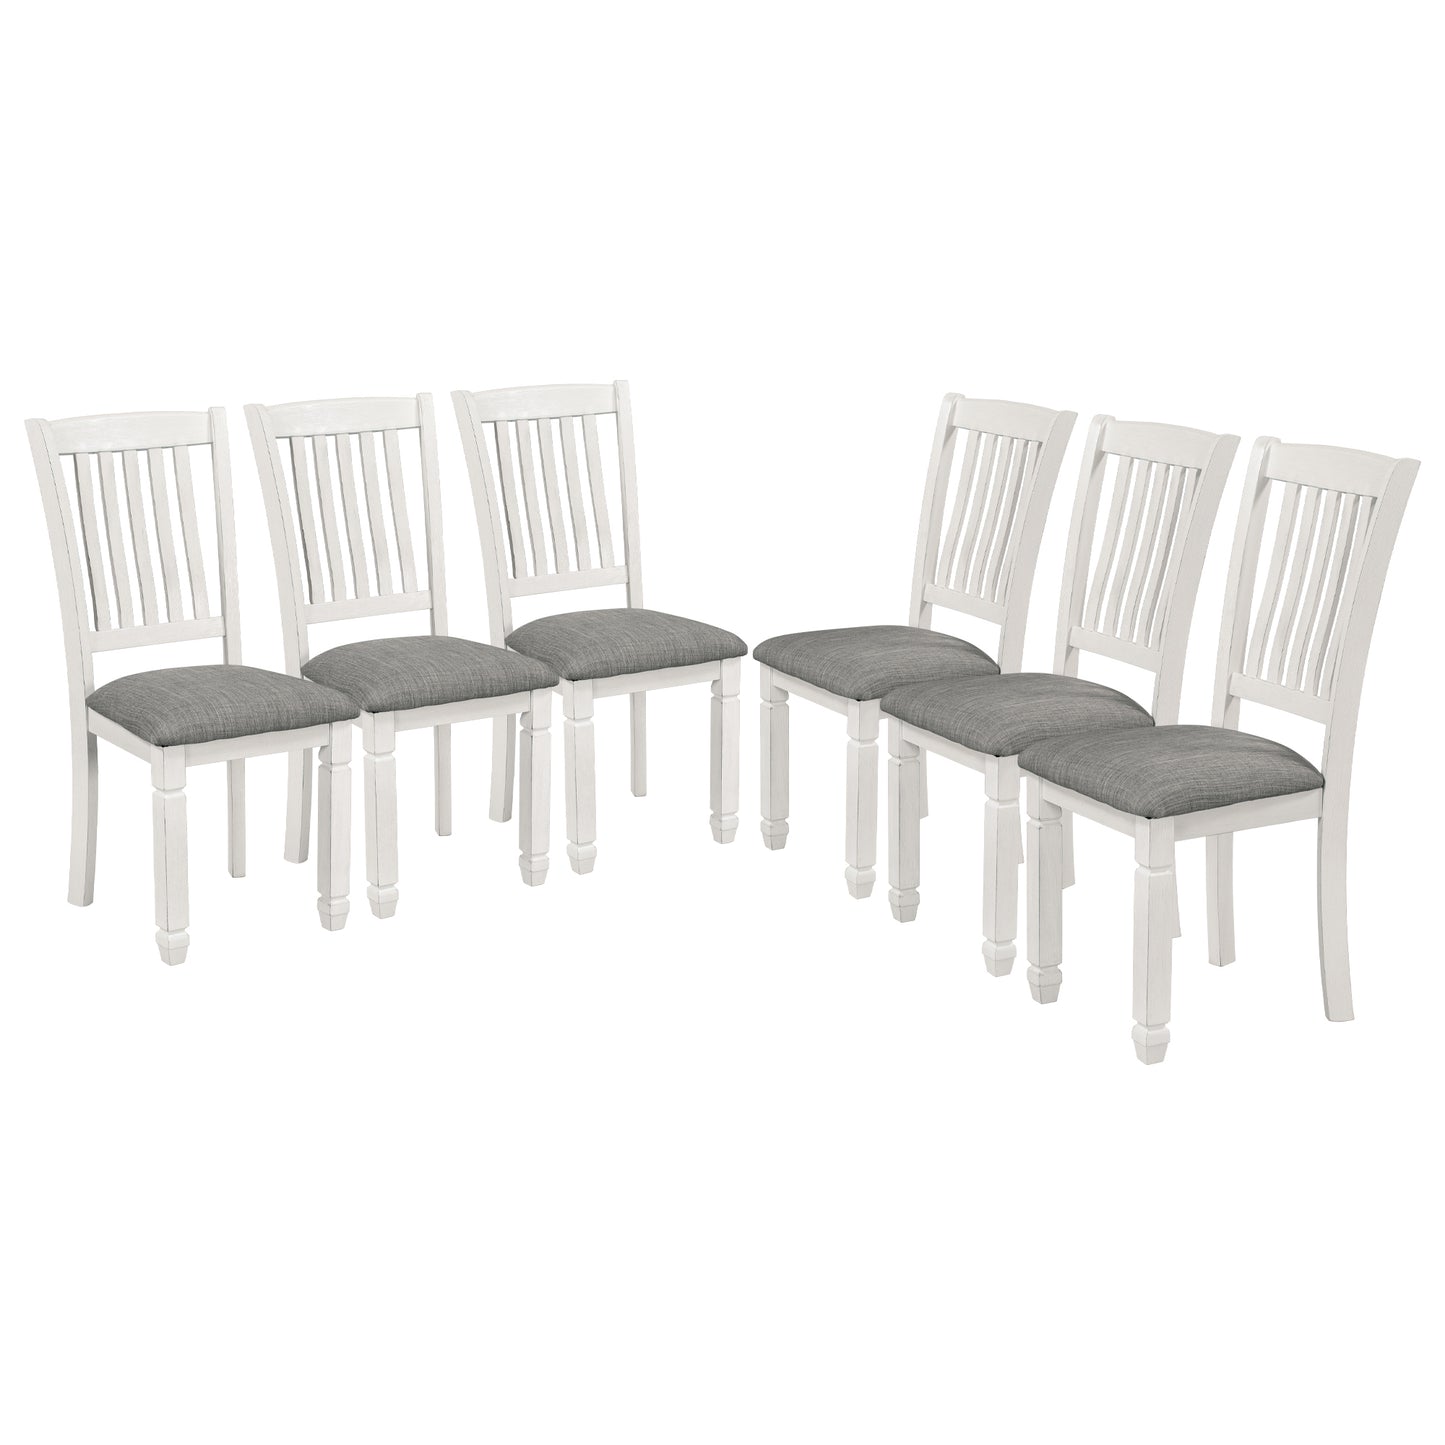 7-Piece Dining Table Set Wood Dining Table and 6 Upholstered Chairs with Shaped Legs for Dining Room/Living Room Furniture (Gray+White)